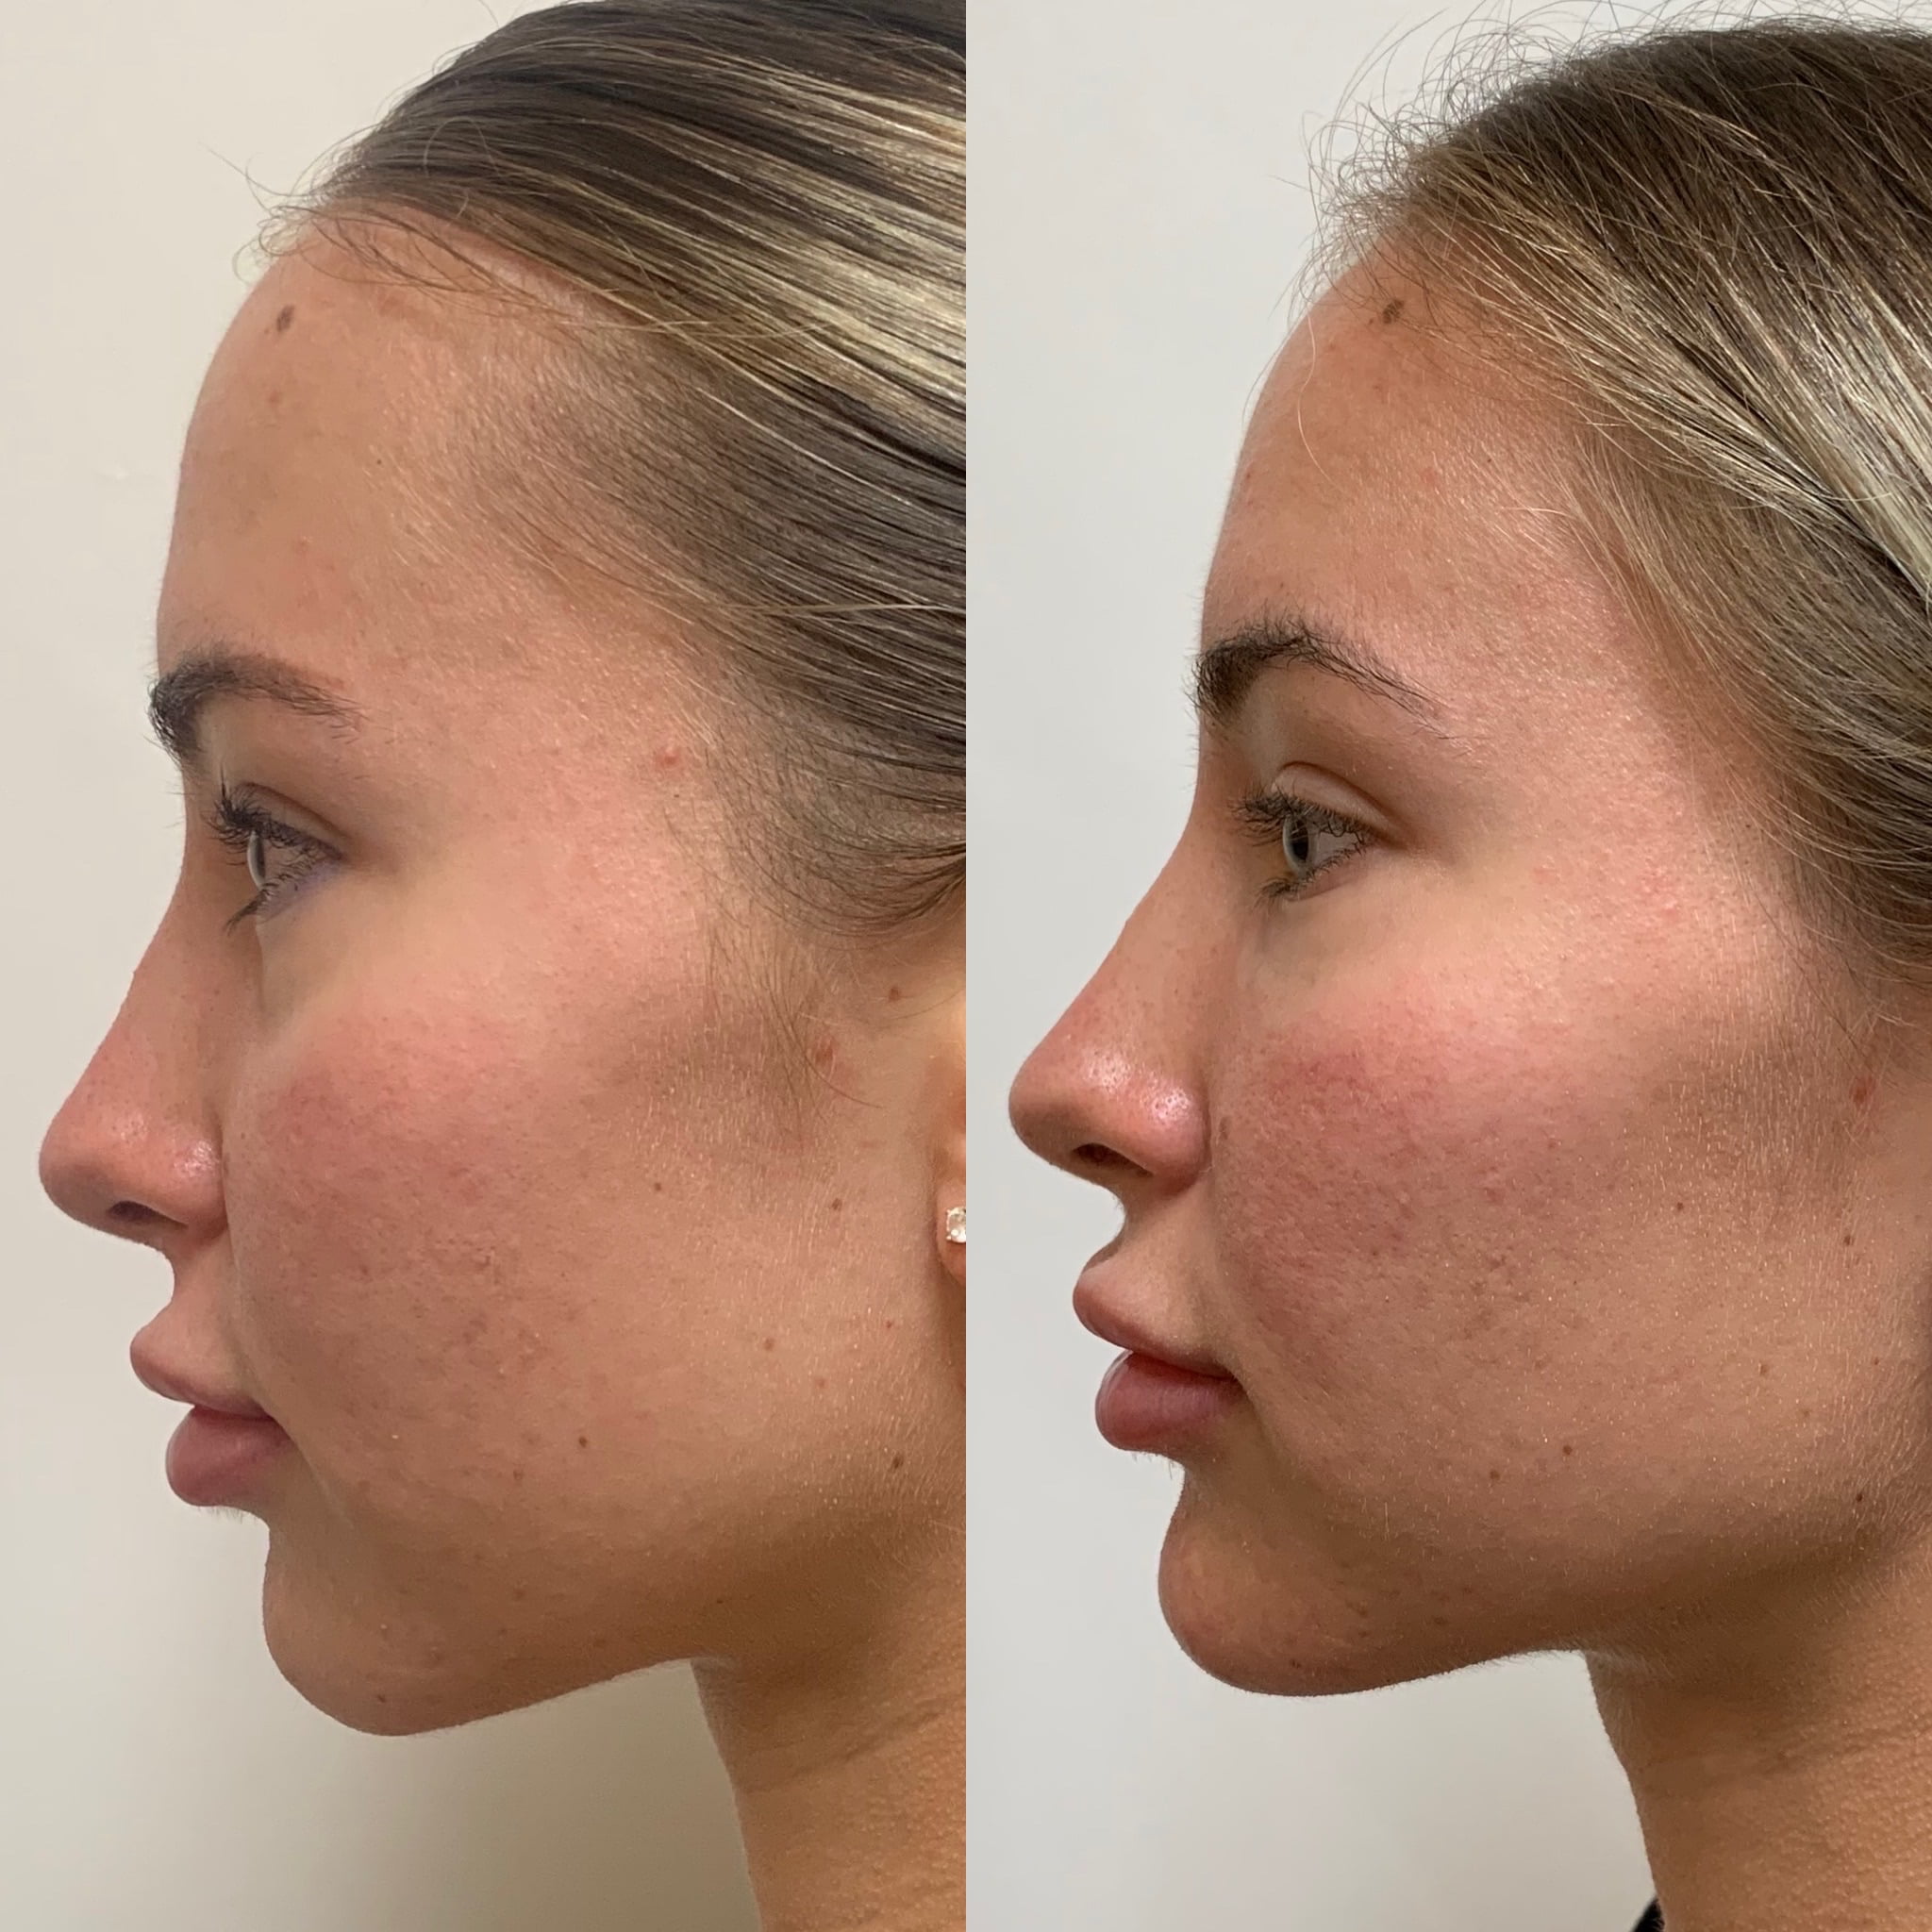 Before and After treatment results on Chin | Beauty Boost Med Spa in Newport Beach, CA